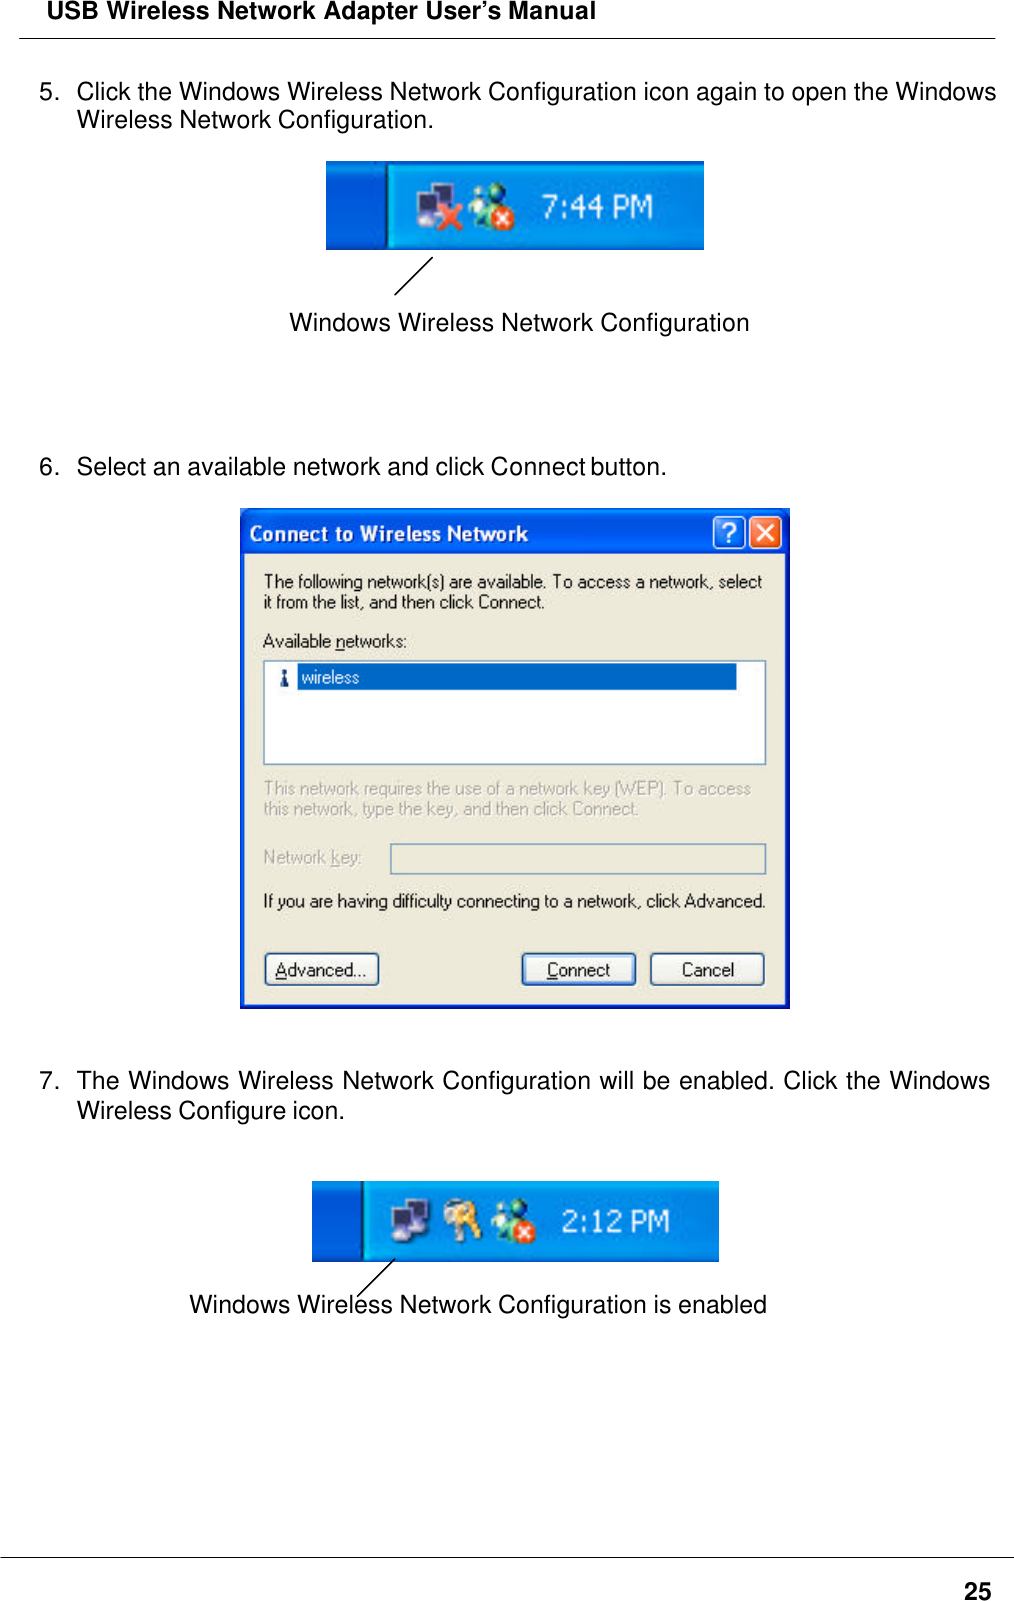  USB Wireless Network Adapter User’s Manual255. Click the Windows Wireless Network Configuration icon again to open the WindowsWireless Network Configuration.Windows Wireless Network Configuration6. Select an available network and click Connect button.7. The Windows Wireless Network Configuration will be enabled. Click the WindowsWireless Configure icon.Windows Wireless Network Configuration is enabled